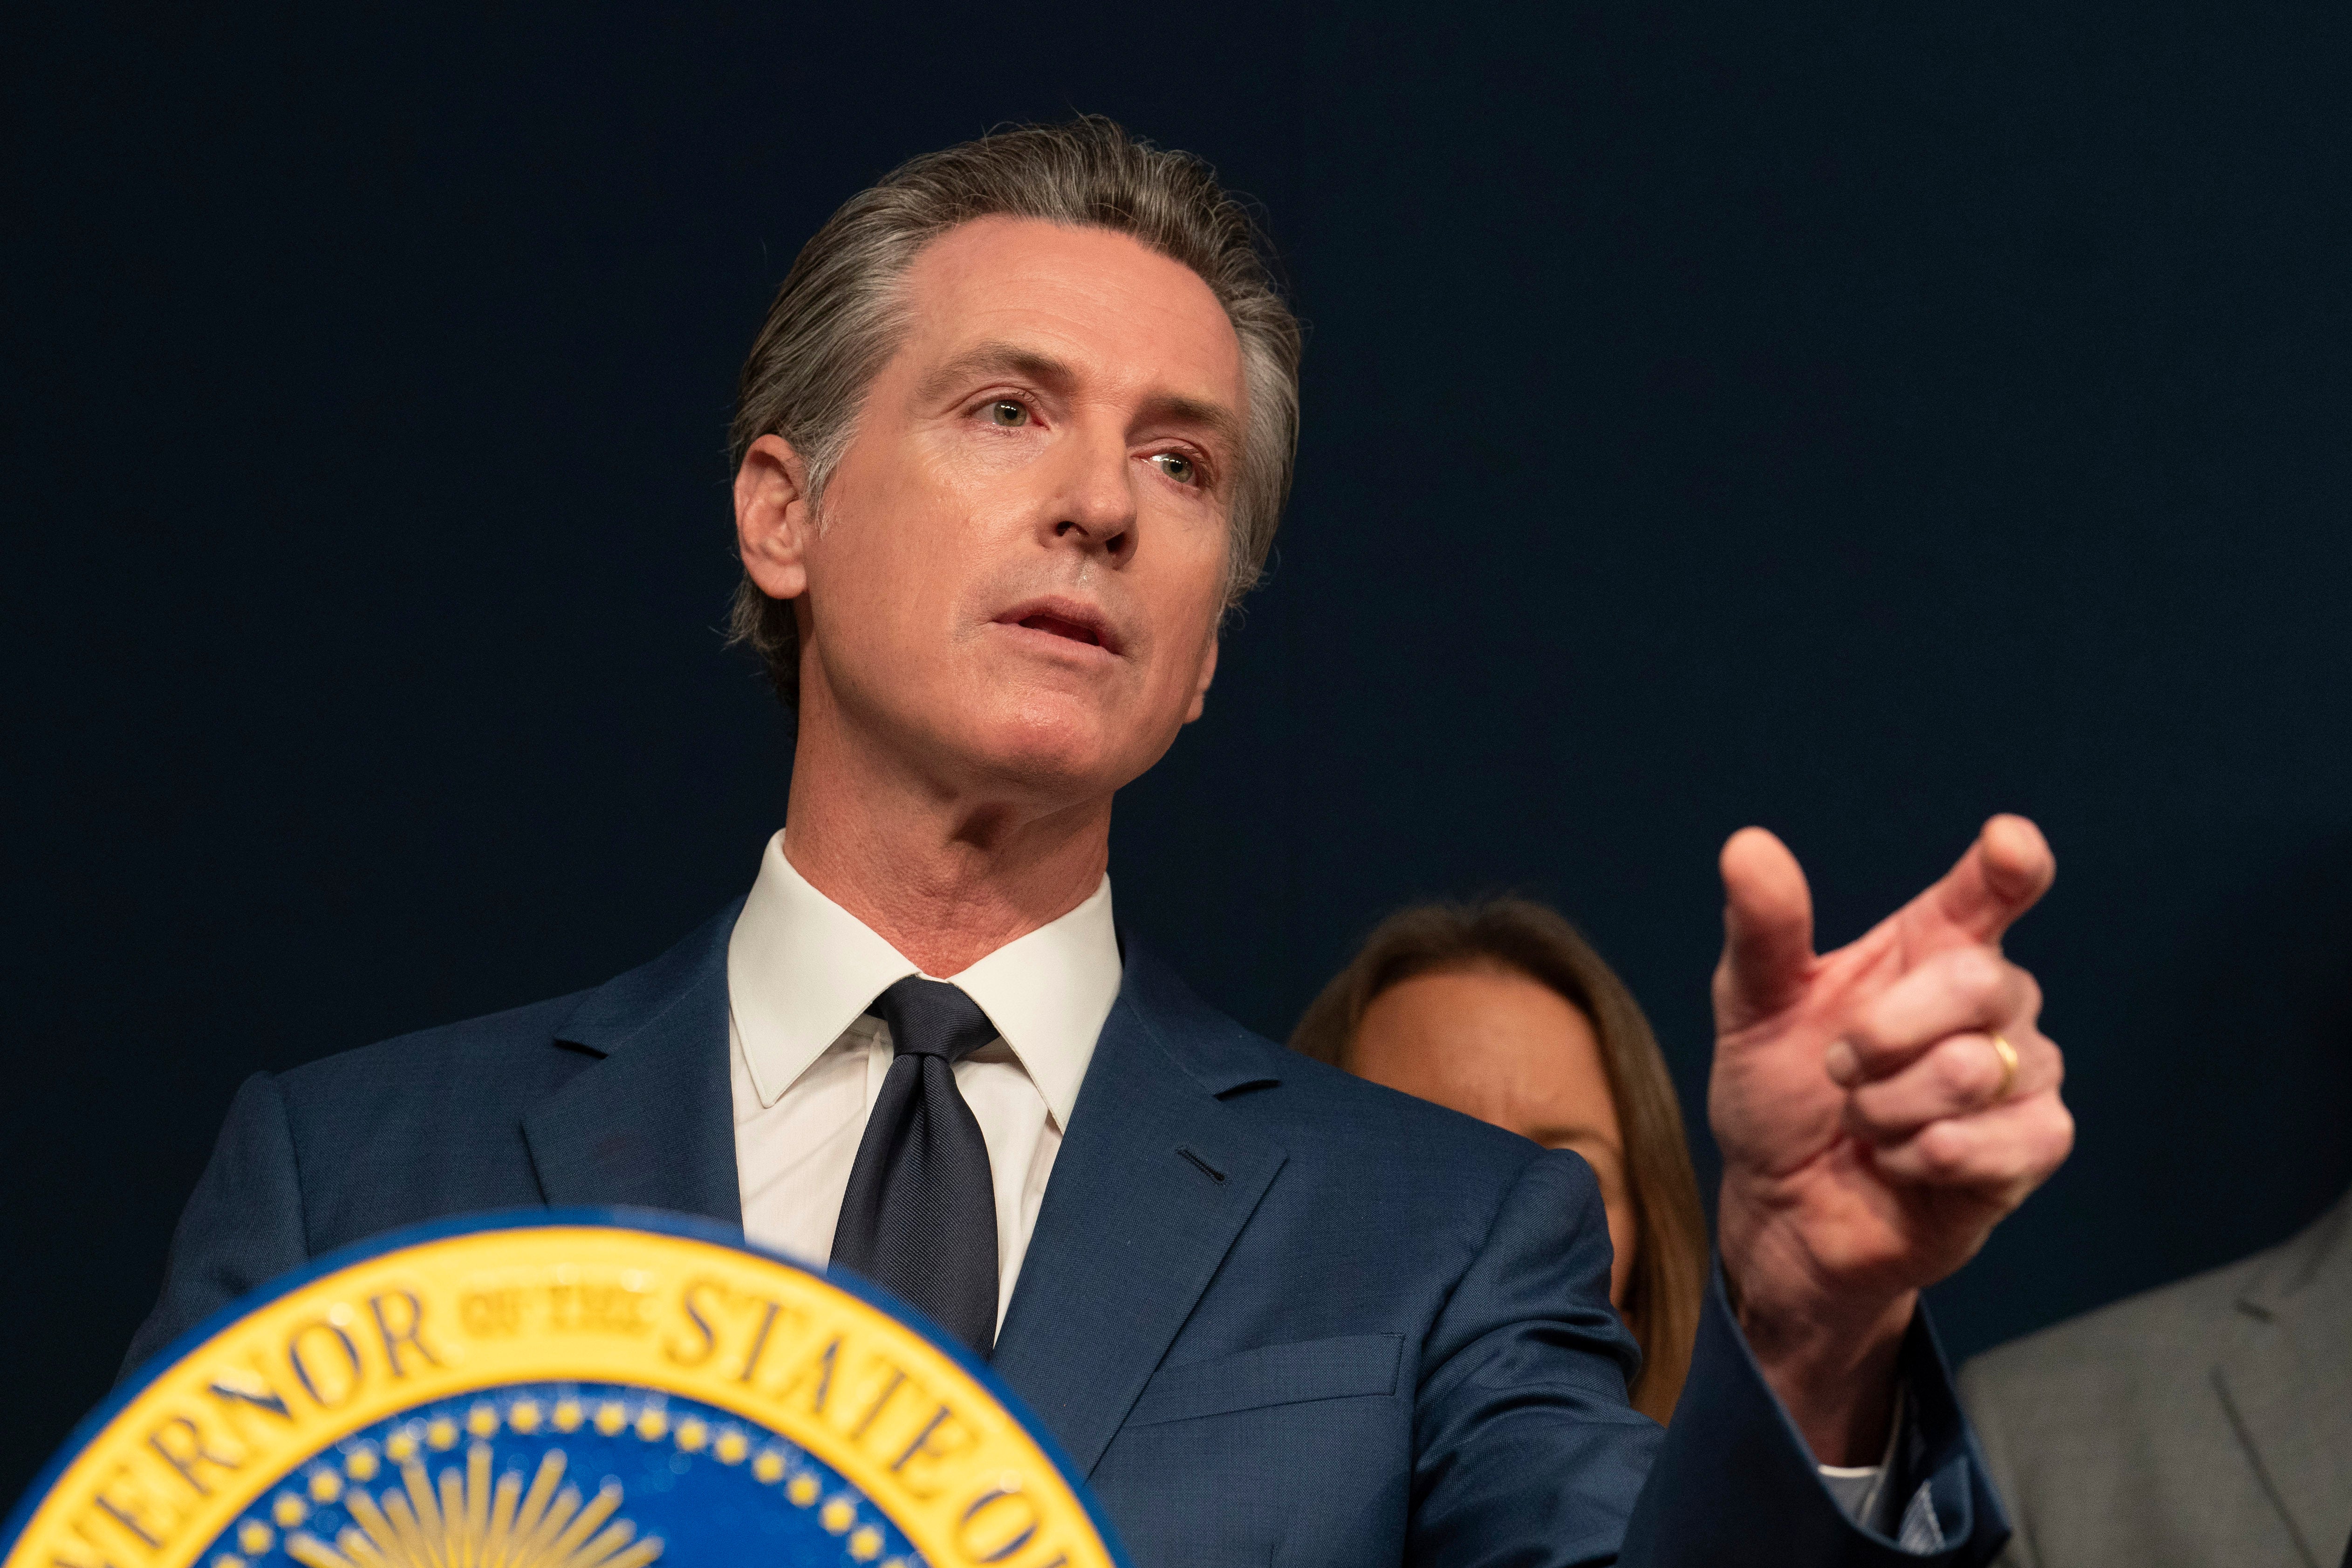 <p>Gavin Newsom offers young voters everything they don’t see in Biden</p>